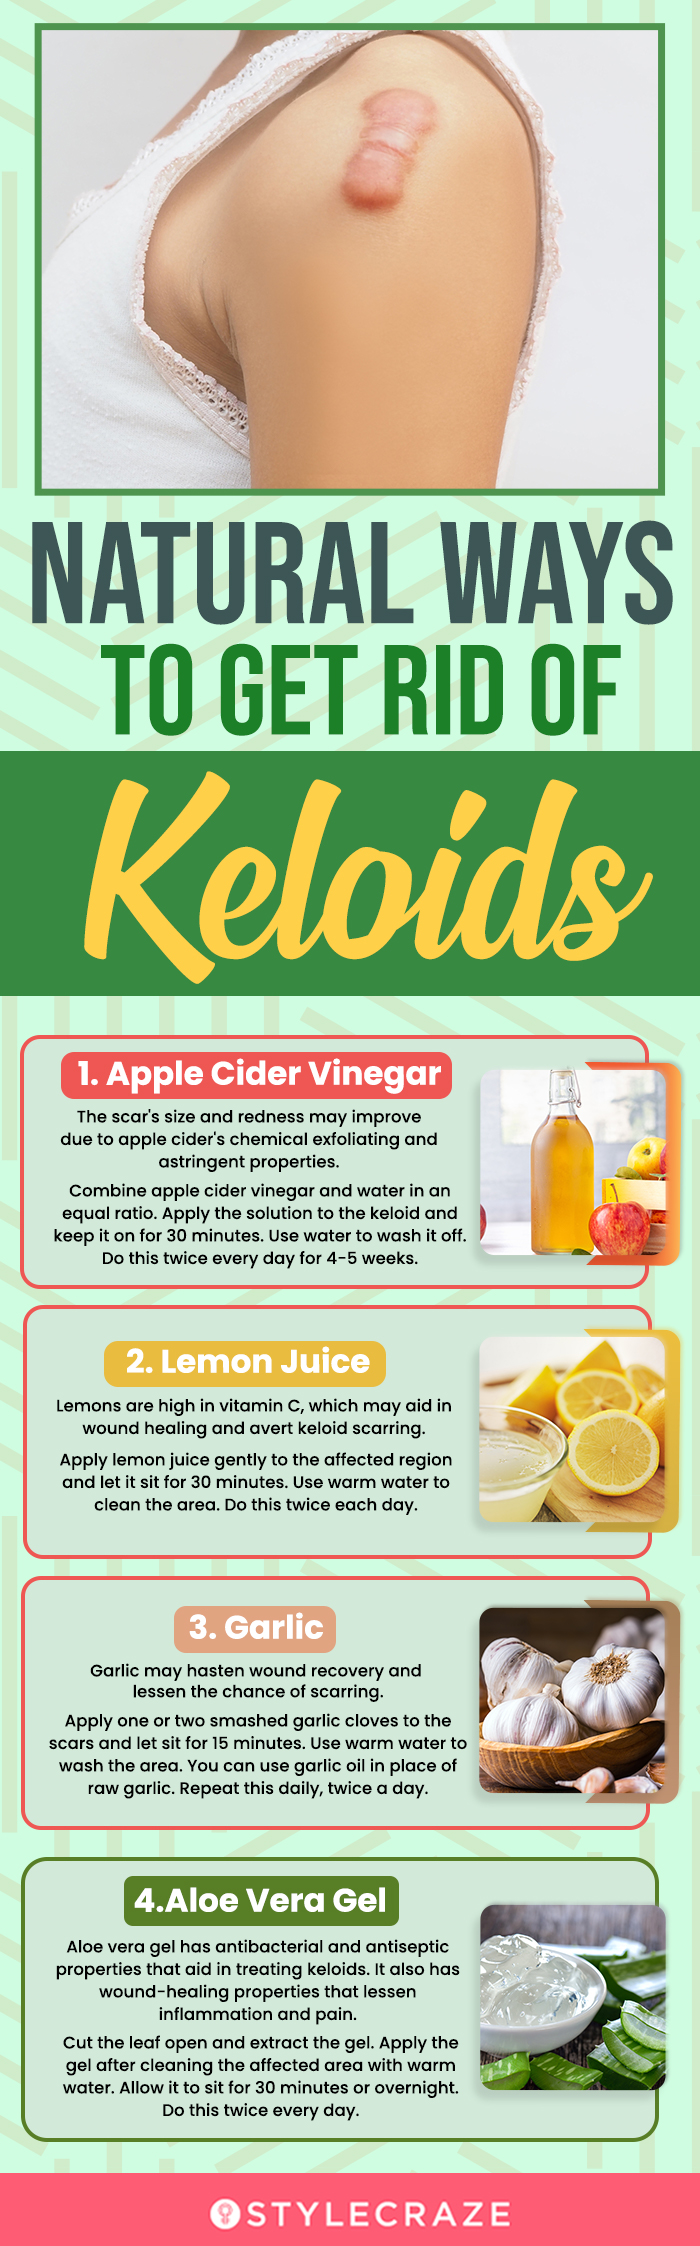 natural ways to get rid of keloids [infographic]